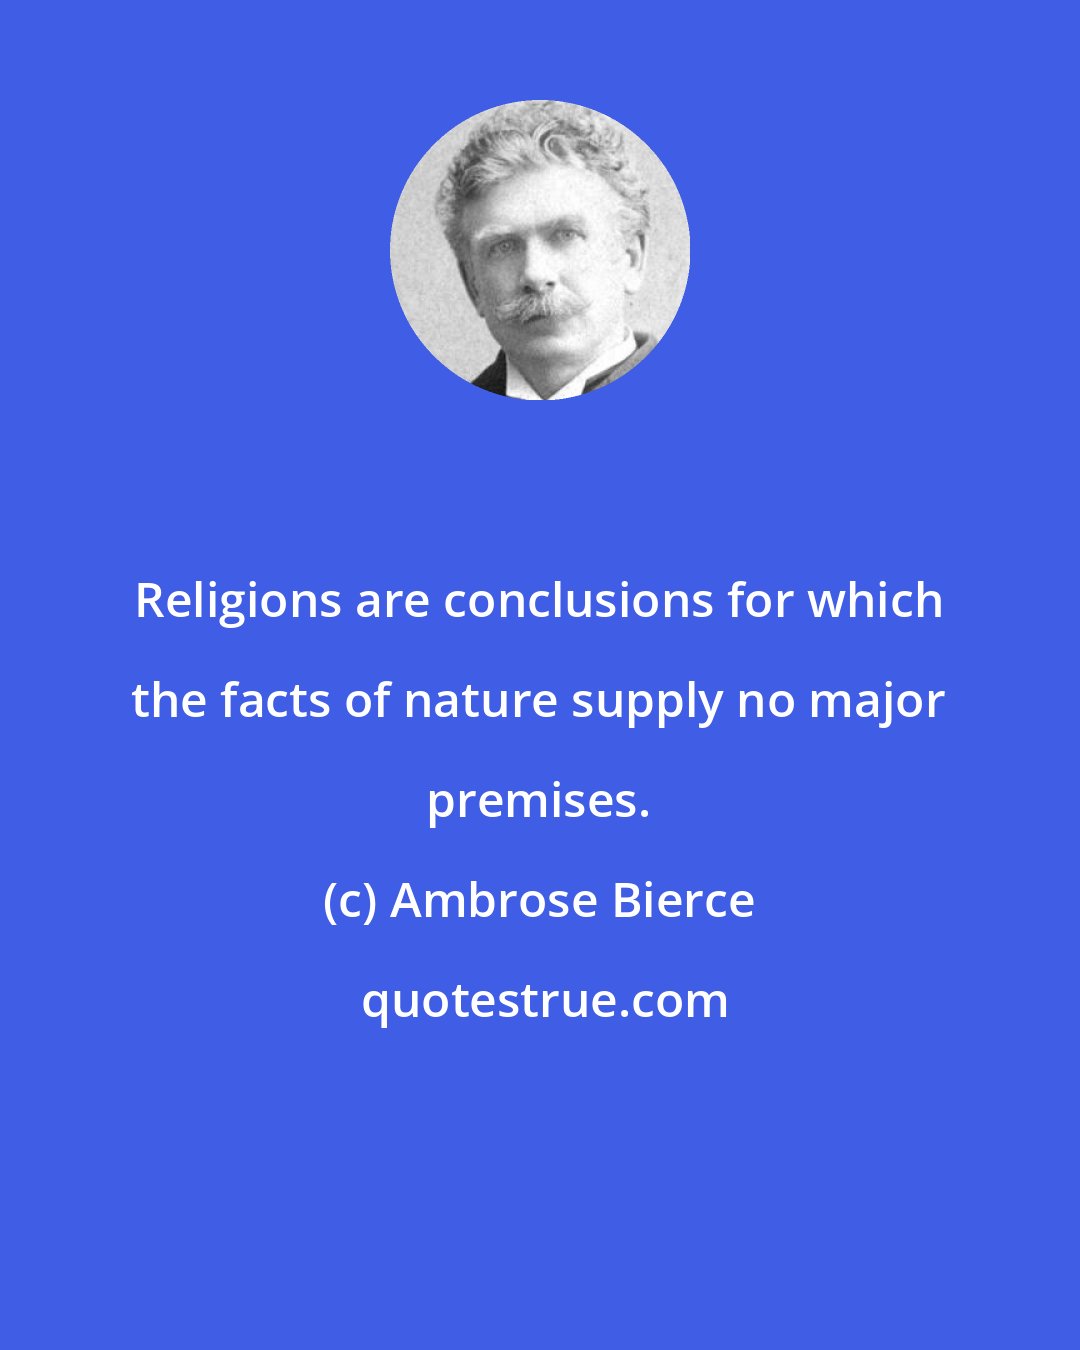 Ambrose Bierce: Religions are conclusions for which the facts of nature supply no major premises.